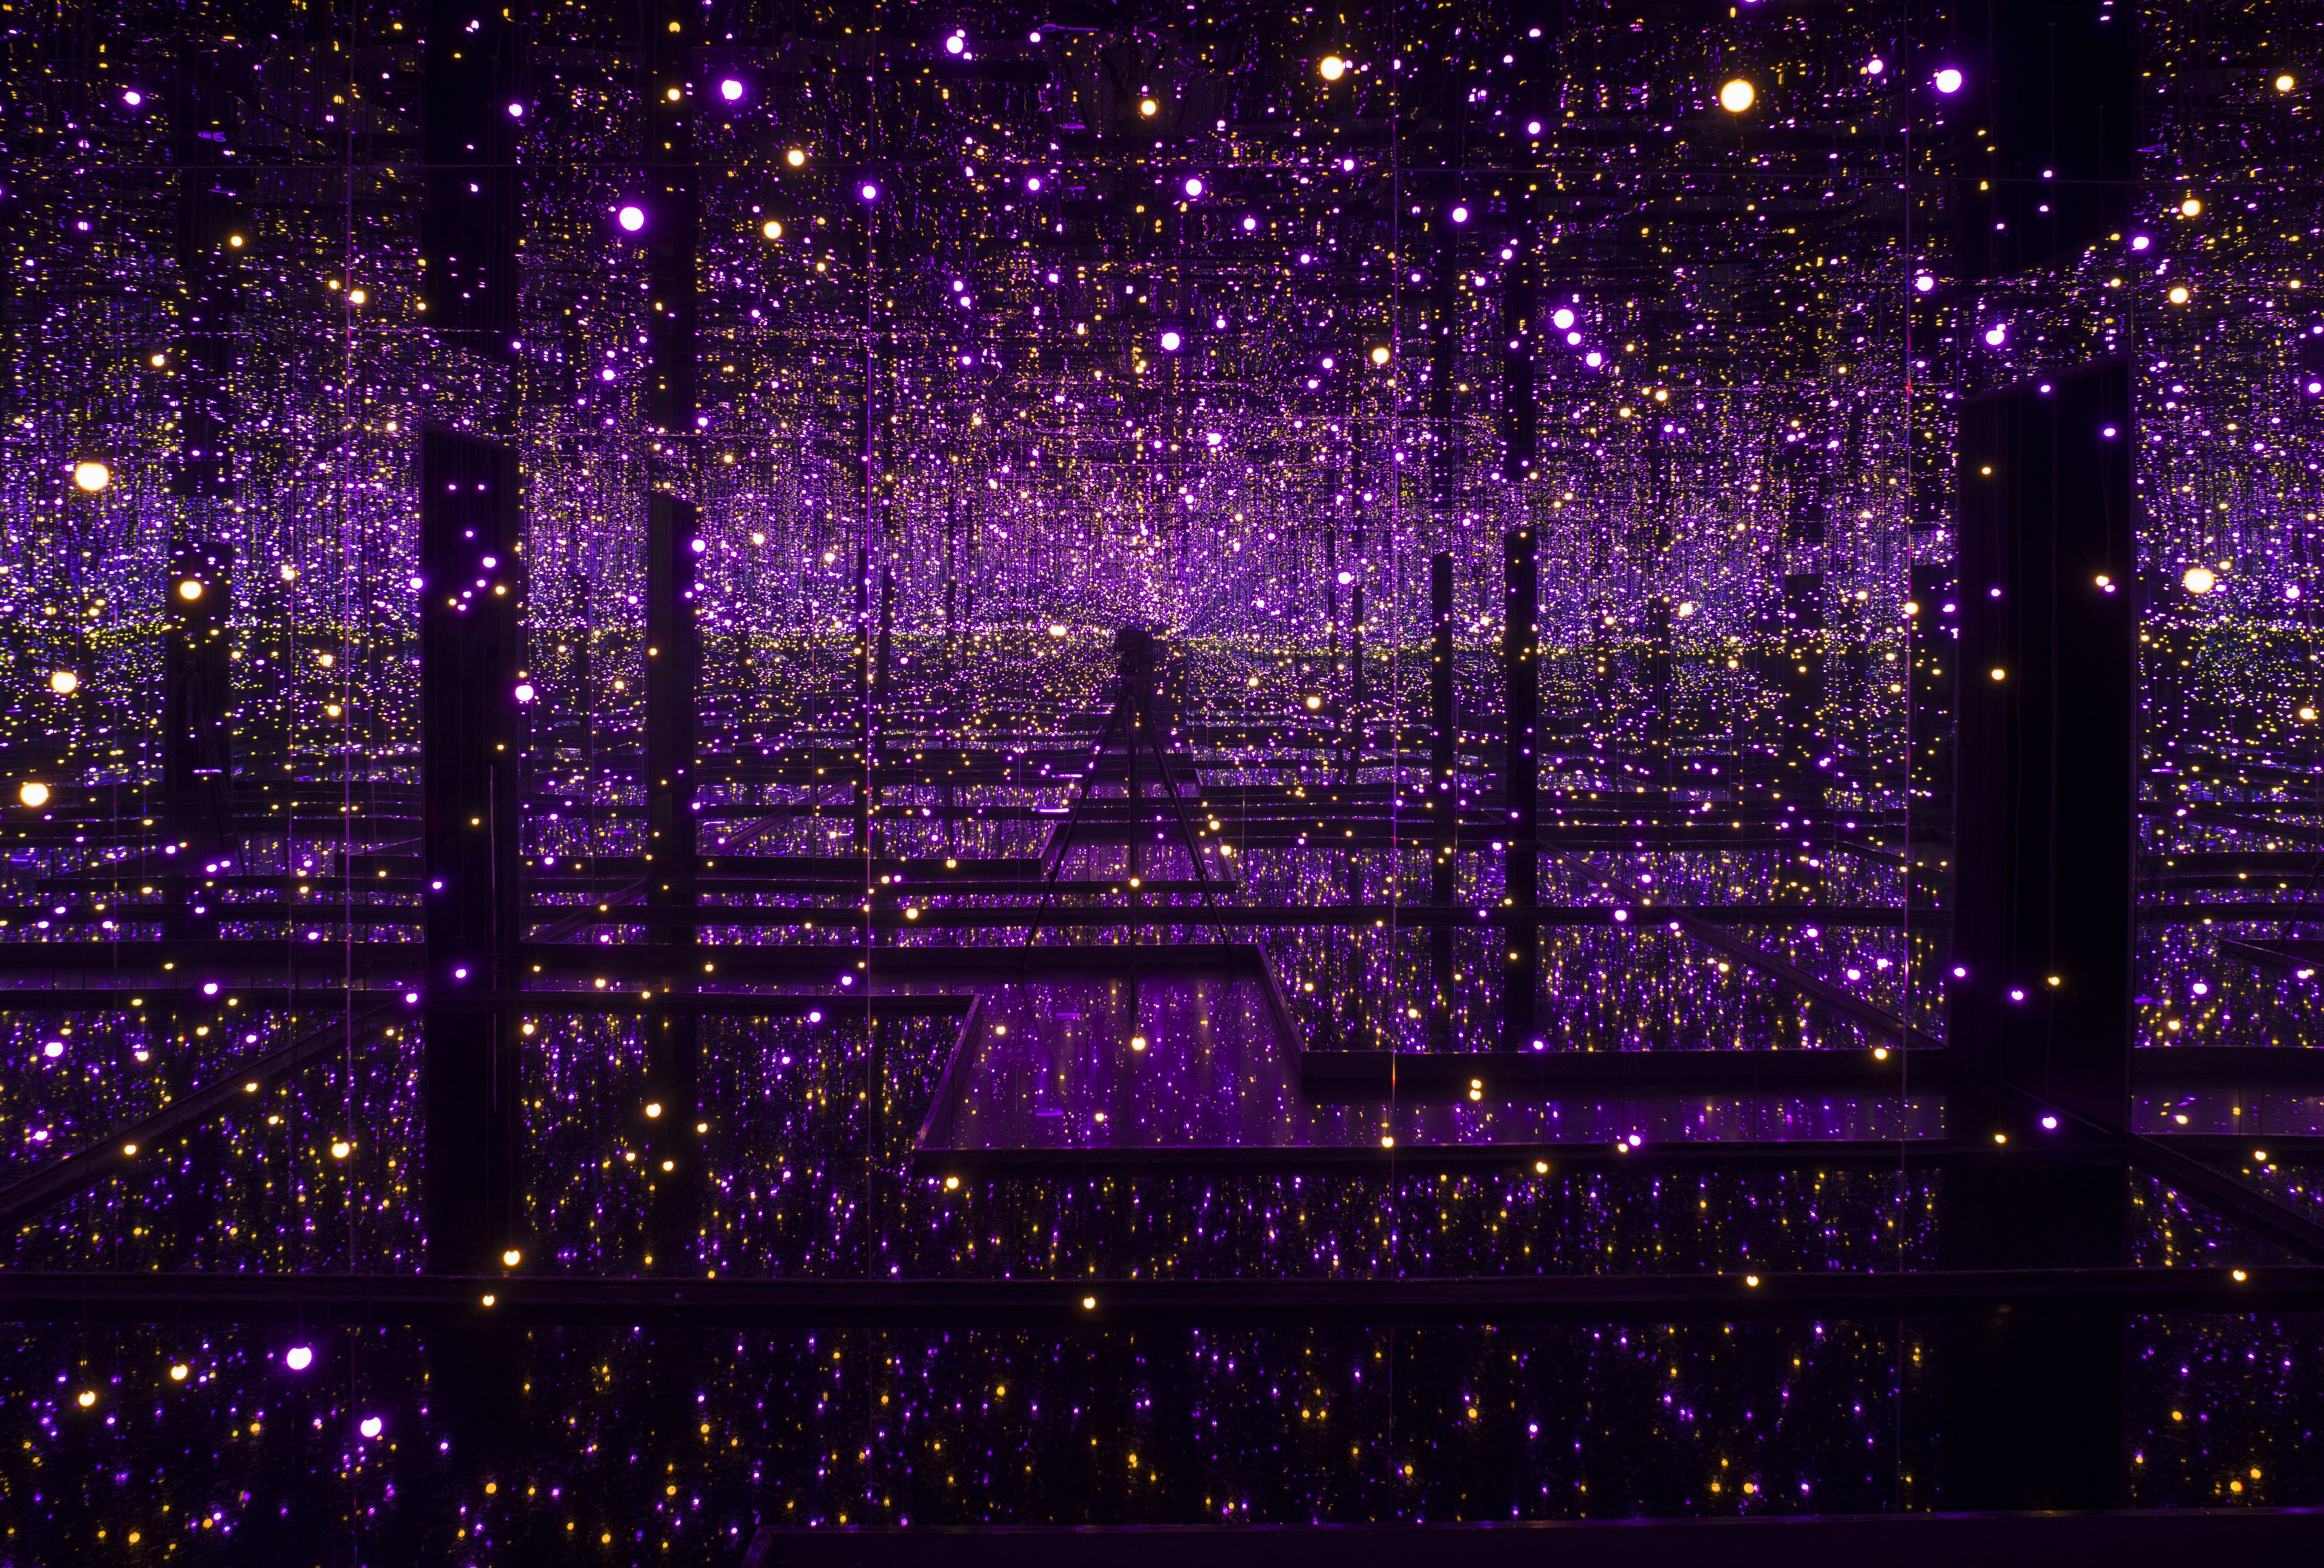 Infinity Mirrored Room Filled With The Brilliance Of Life 2011